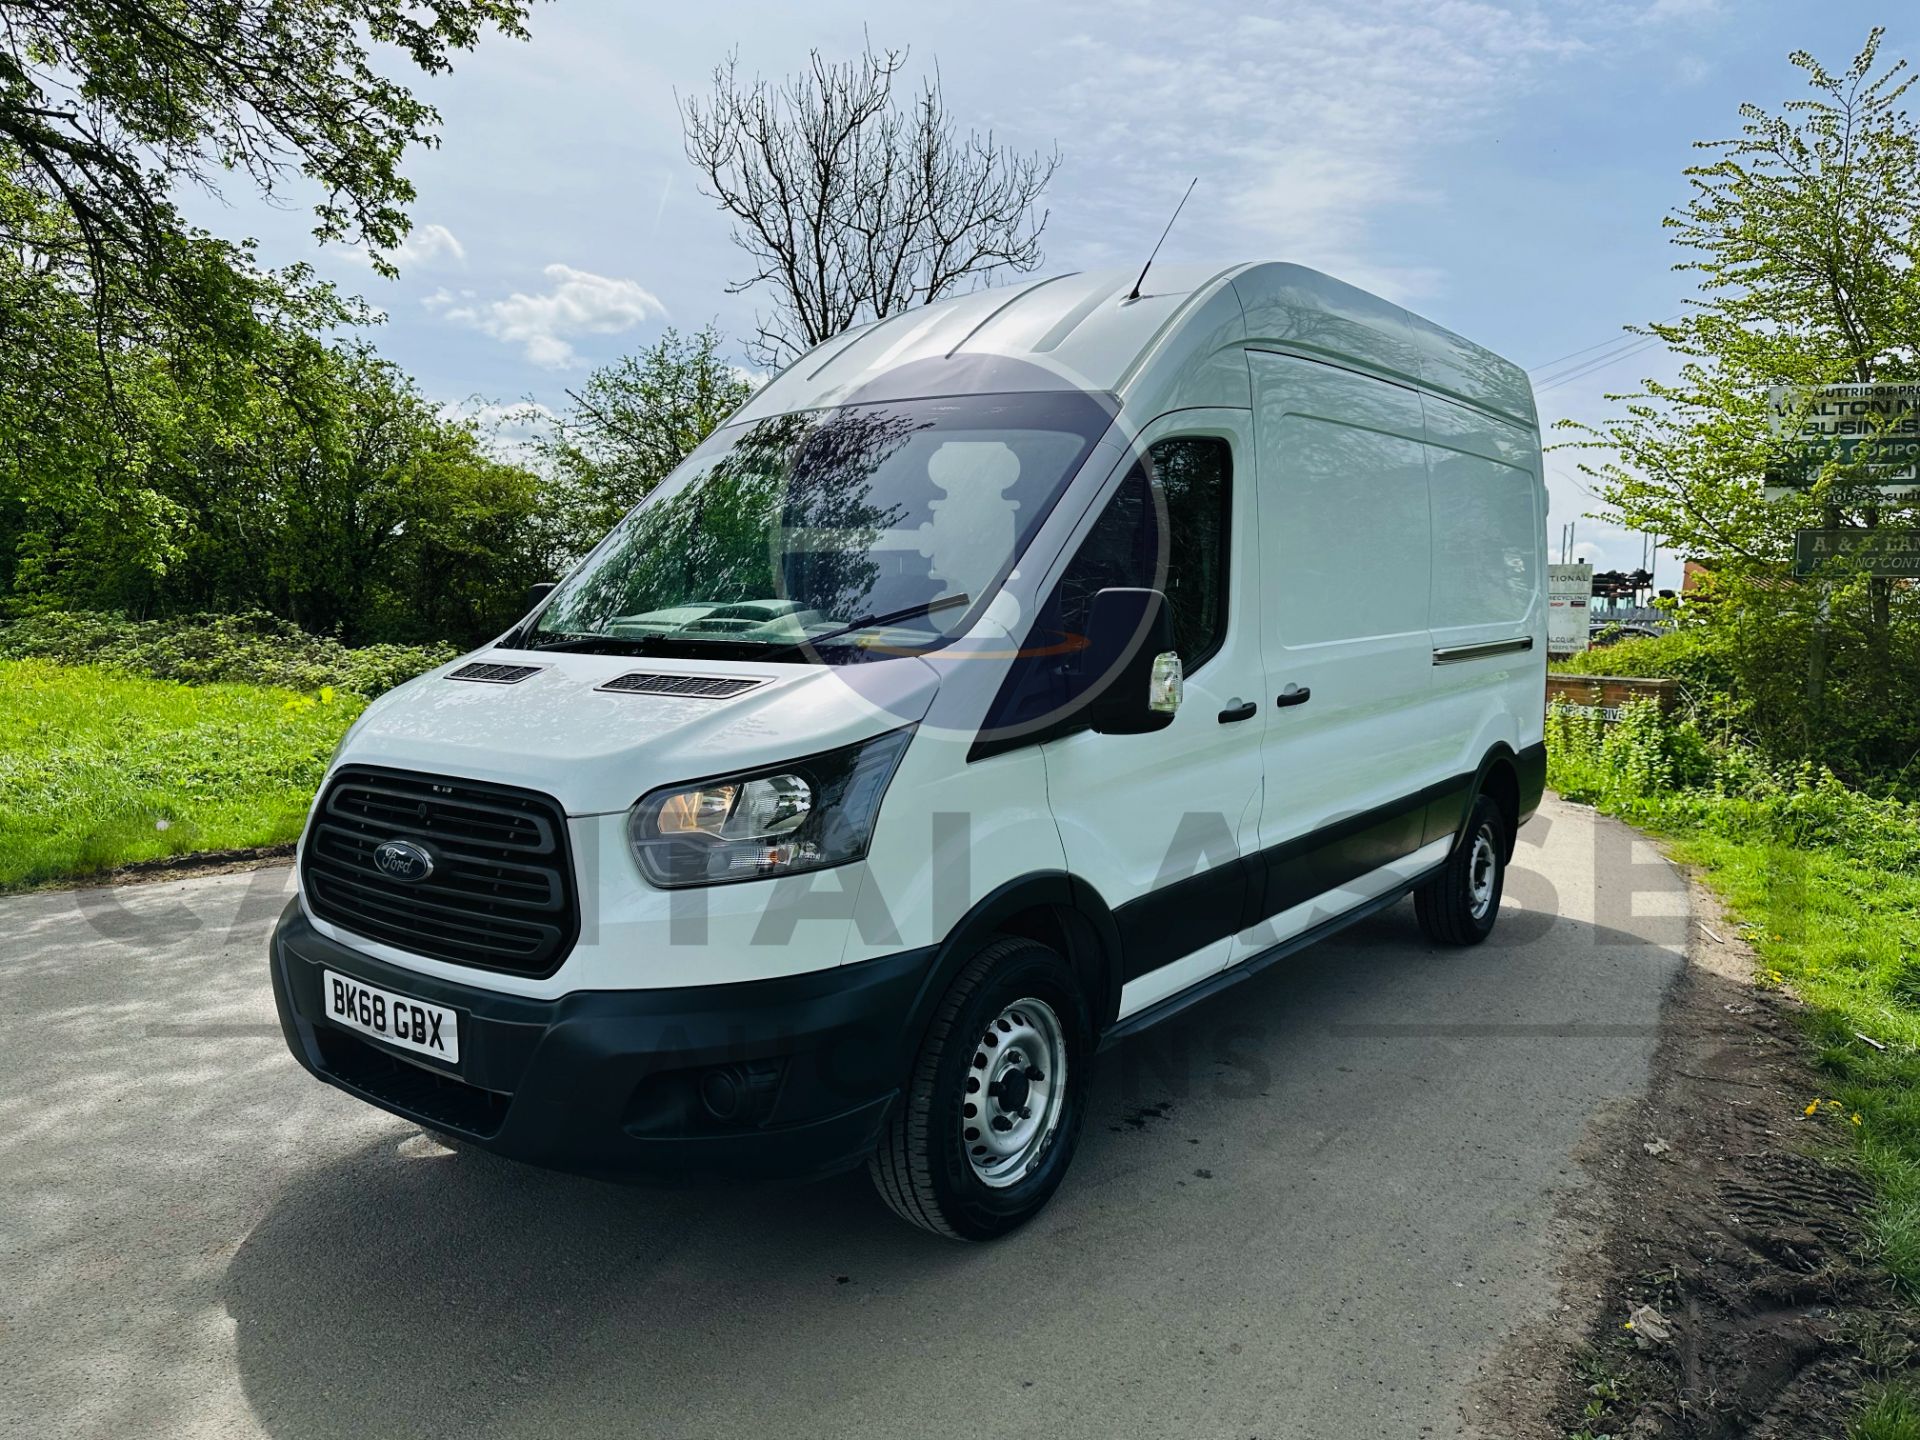 FORD TRANSIT 350 2.0 TDCI *ECOBLUE EDITION* LWB HIGH TOP - EURO 6 - 2019 MODEL - 1 OWNER - LOOK!!! - Image 4 of 32